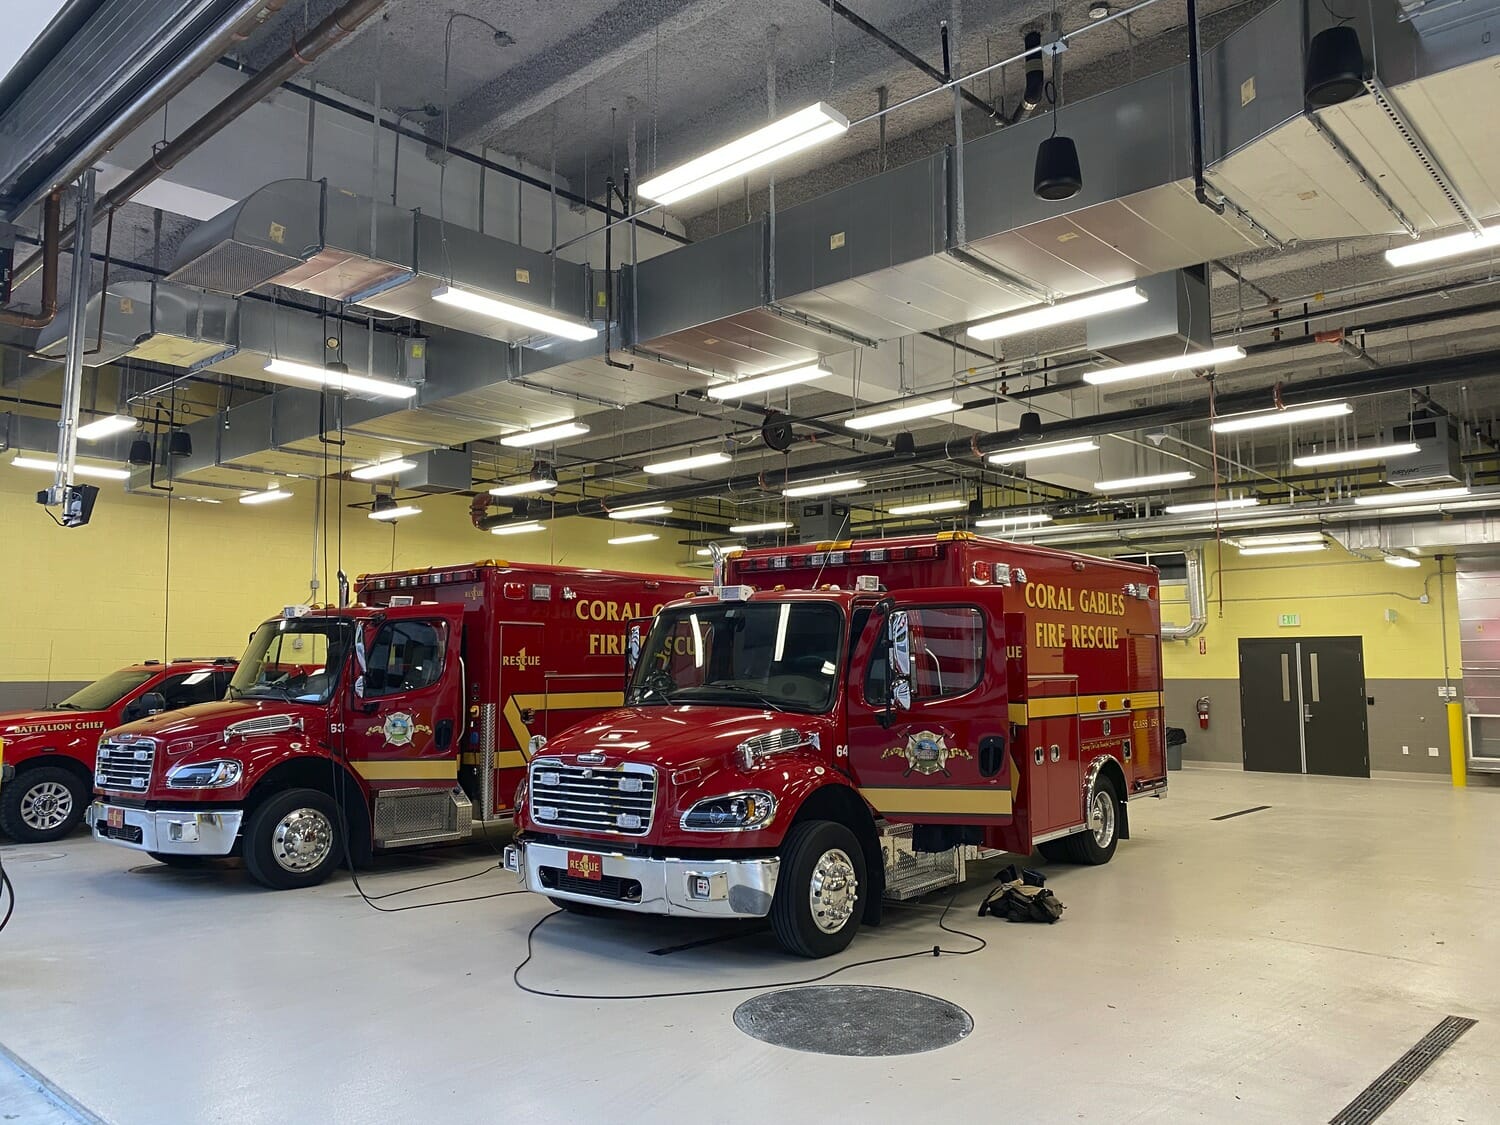 Two red fire trucks parked in a large room.